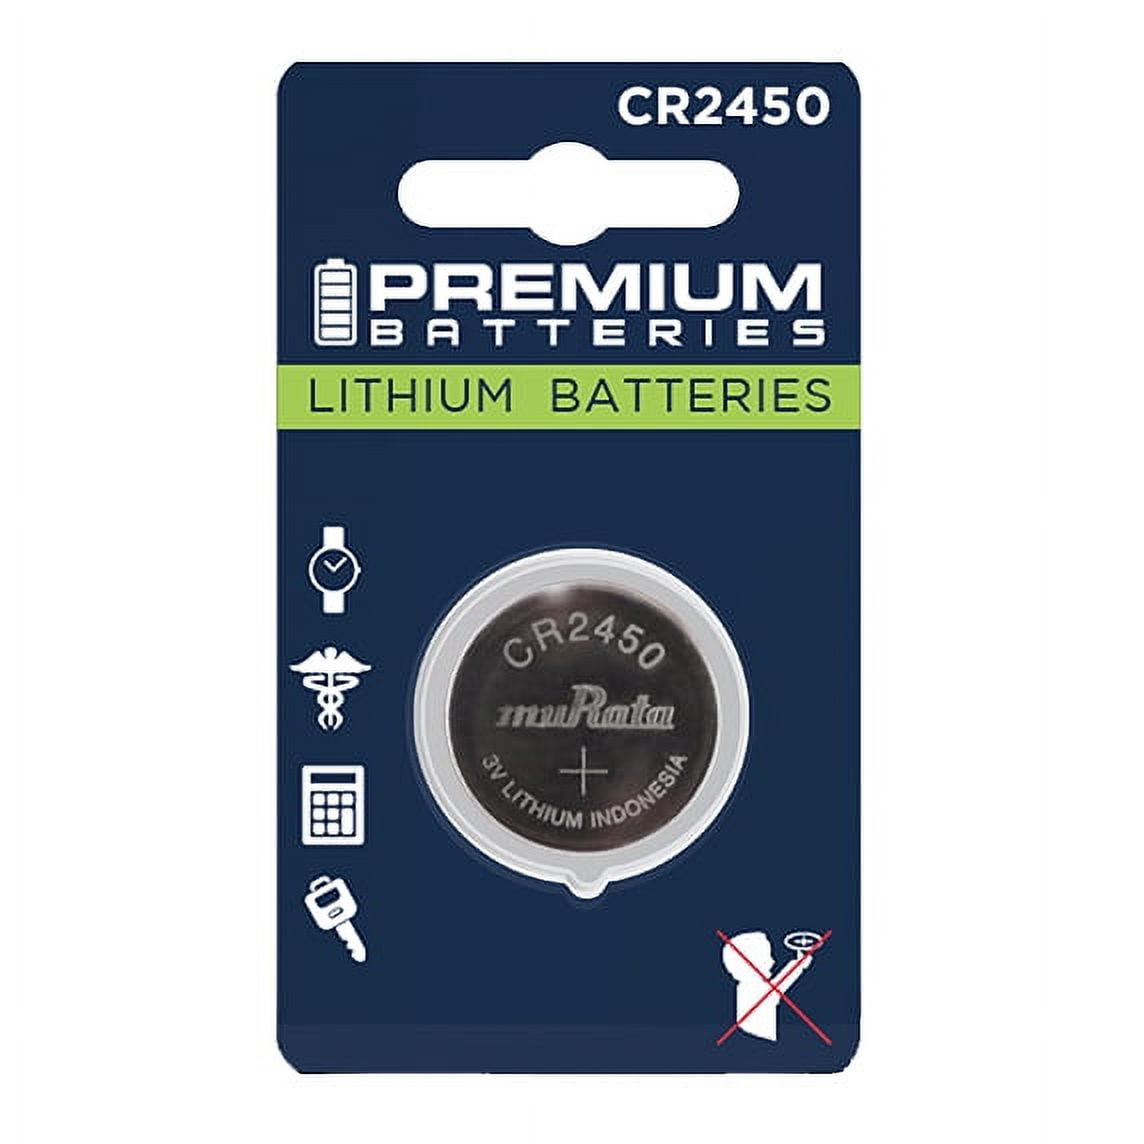 Sony CR2450 3V Lithium Coin Battery Pack Of 5 Batteries